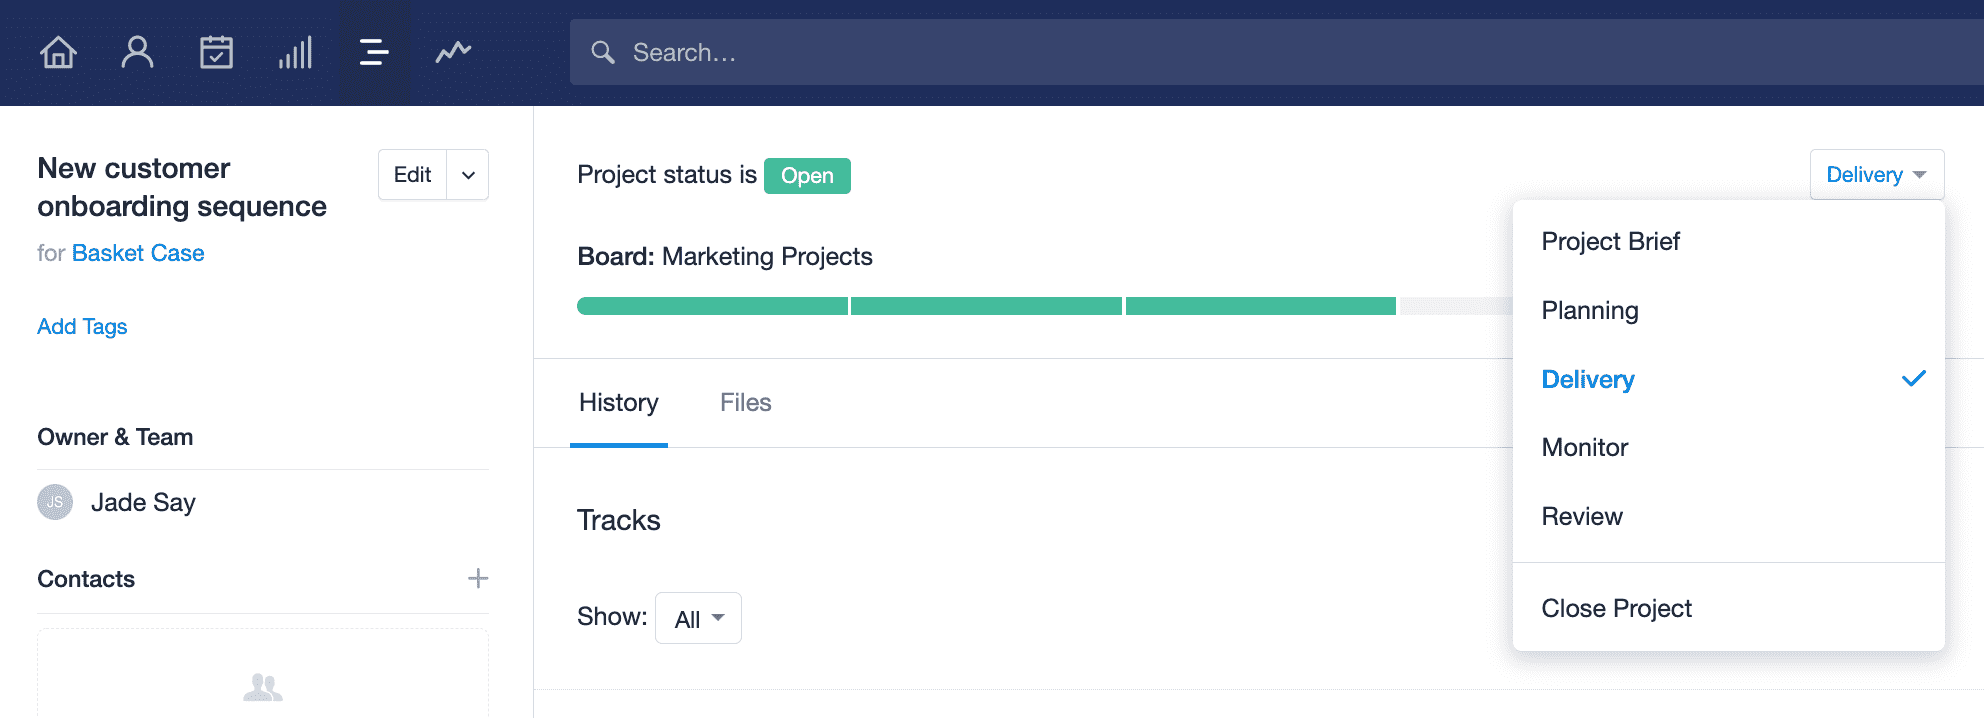 progress bar at the top of the project record displays where the project is up to in the process. A drop down menu is displayed to show the Stages the project can be moved to